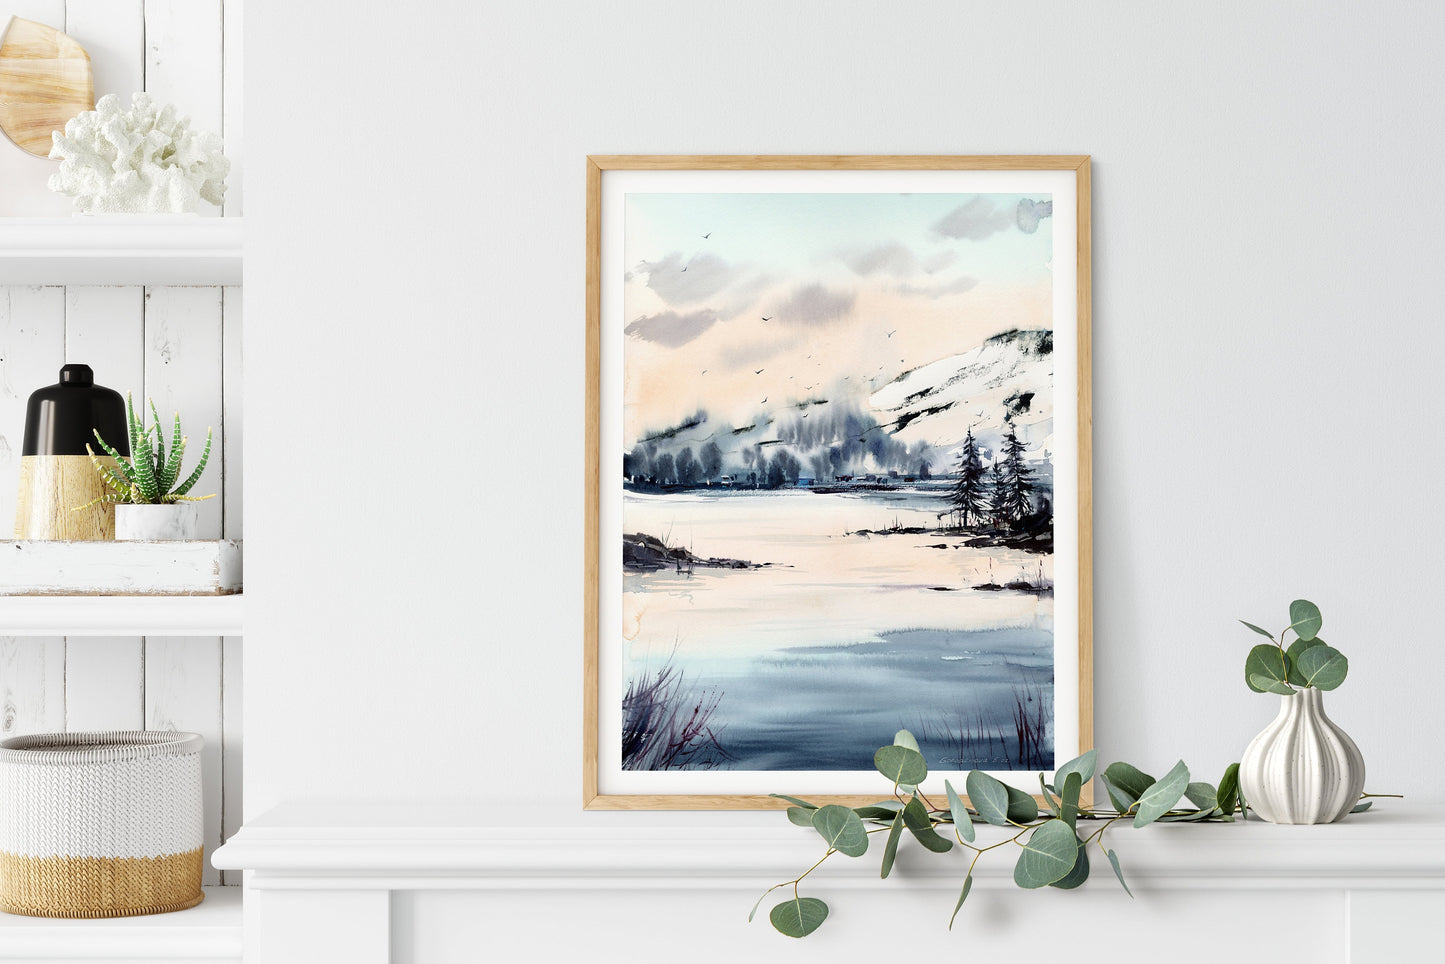 Mountain Art Print, Nature Wall Art, Pine Forest Landscape Painting on Canvas, Modern Hotel Wall Decor